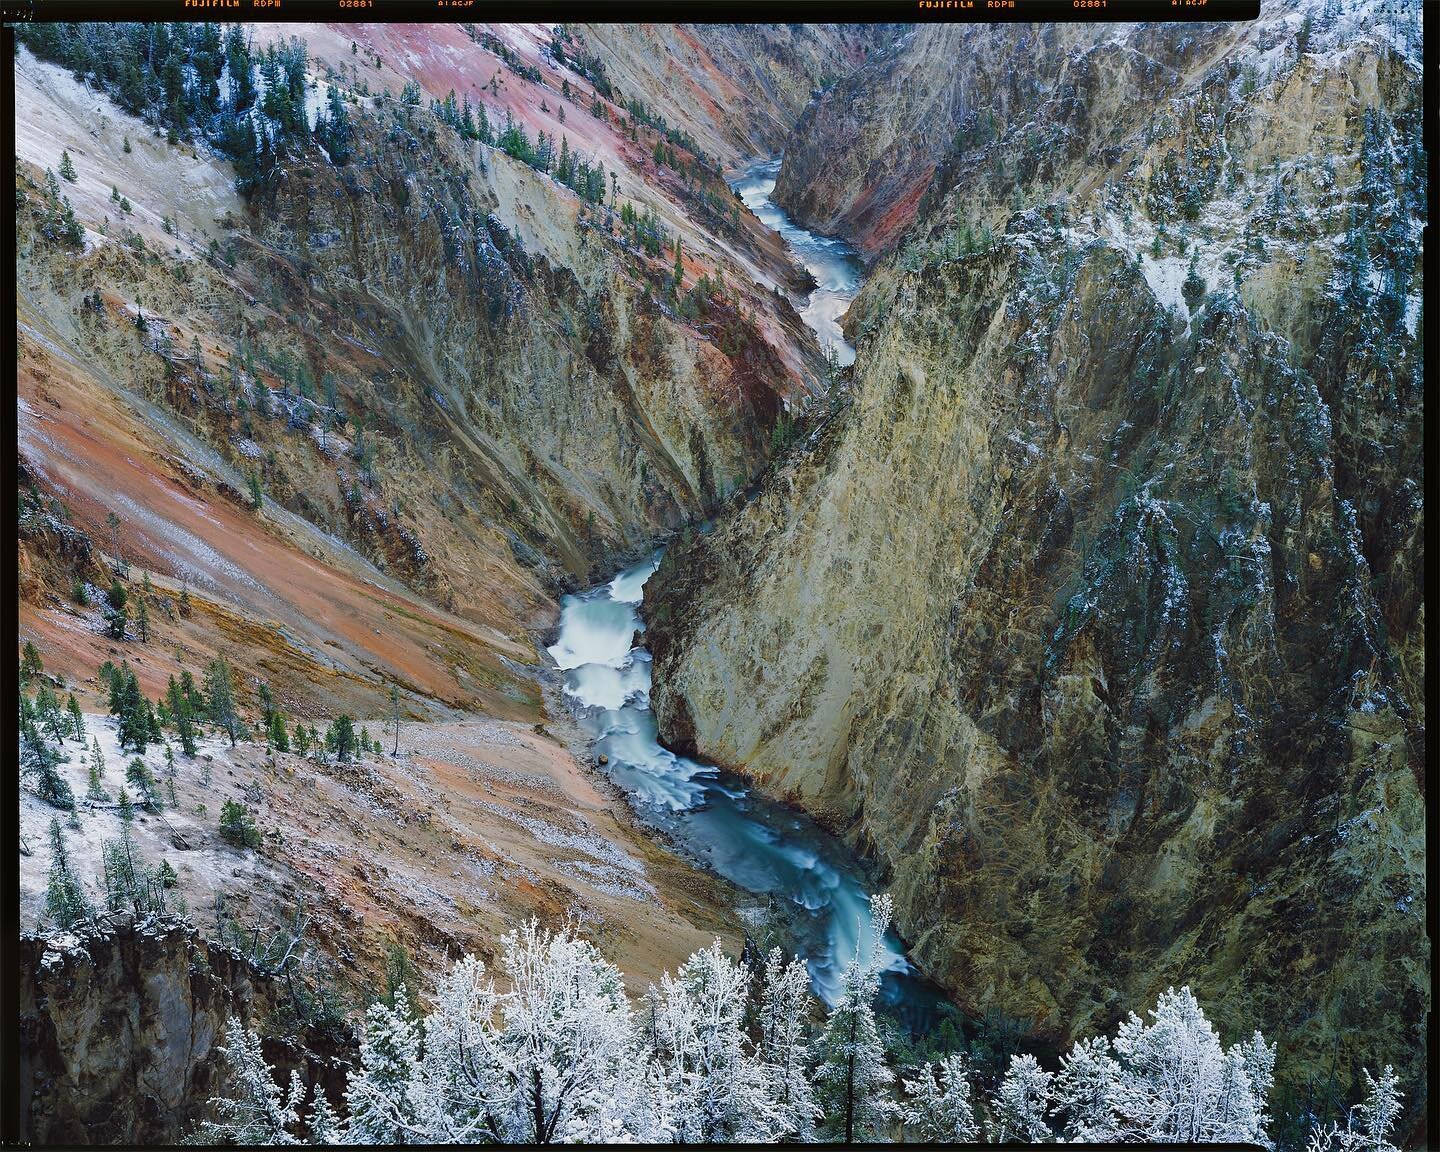 It took me quite a few years and many unsuccessful attempts to photograph this canyon in Yellowstone. Every time I visited it before either the light wasn&rsquo;t good or other conditions didn&rsquo;t work, or I simply could not find the right compos